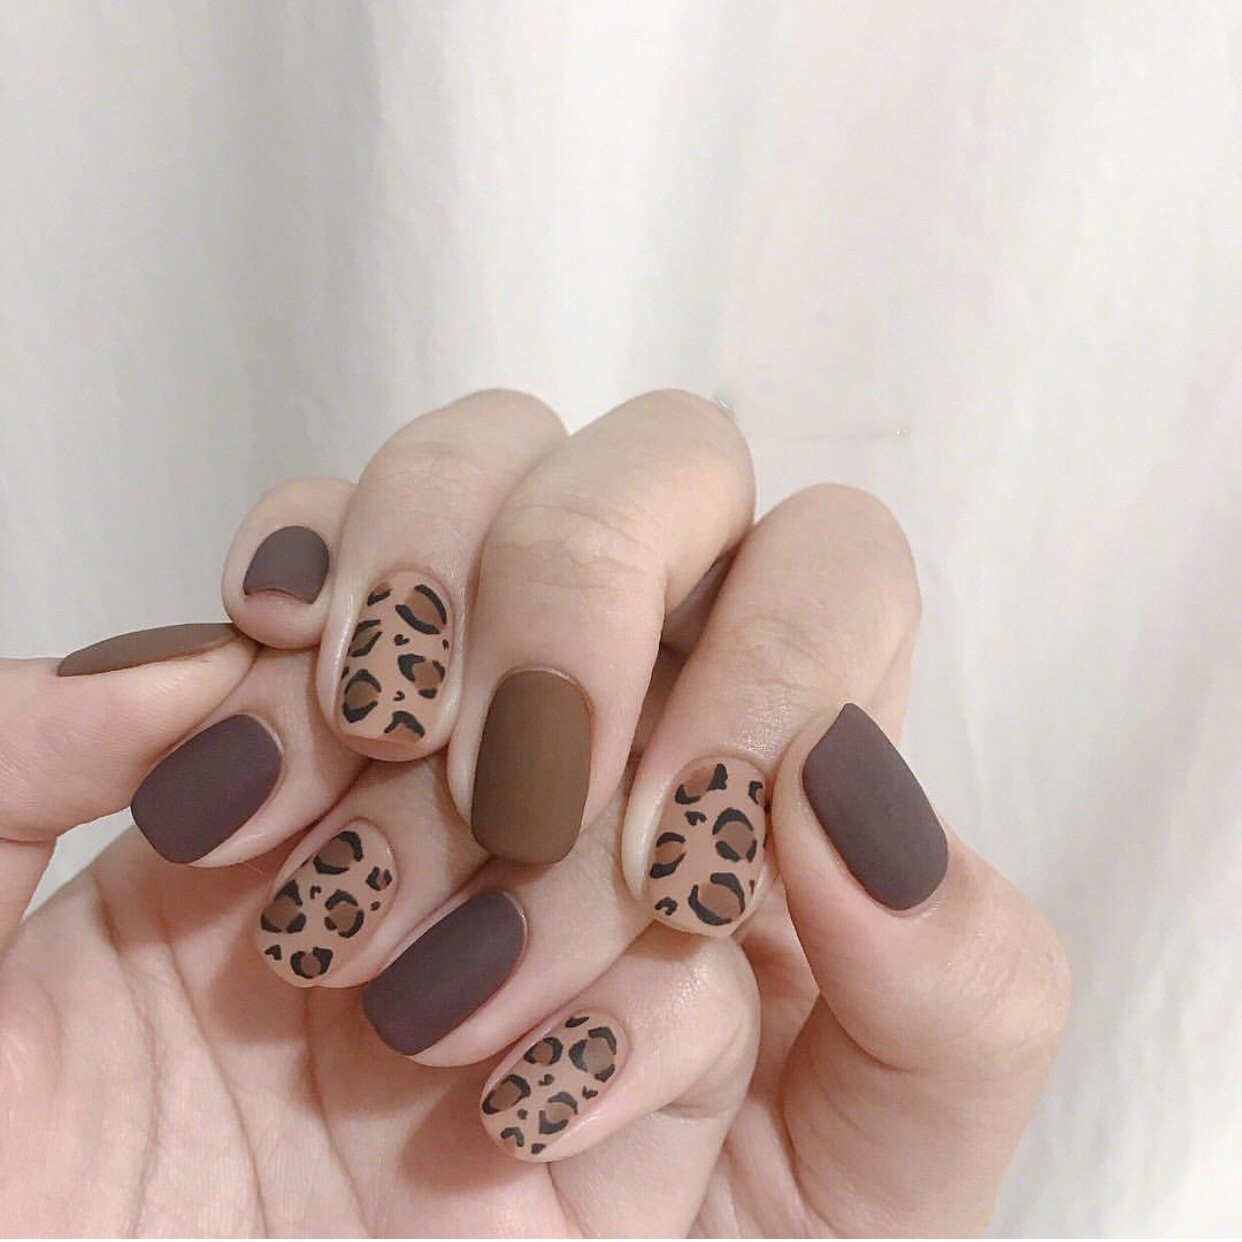 New ins small red book leopard print nai...